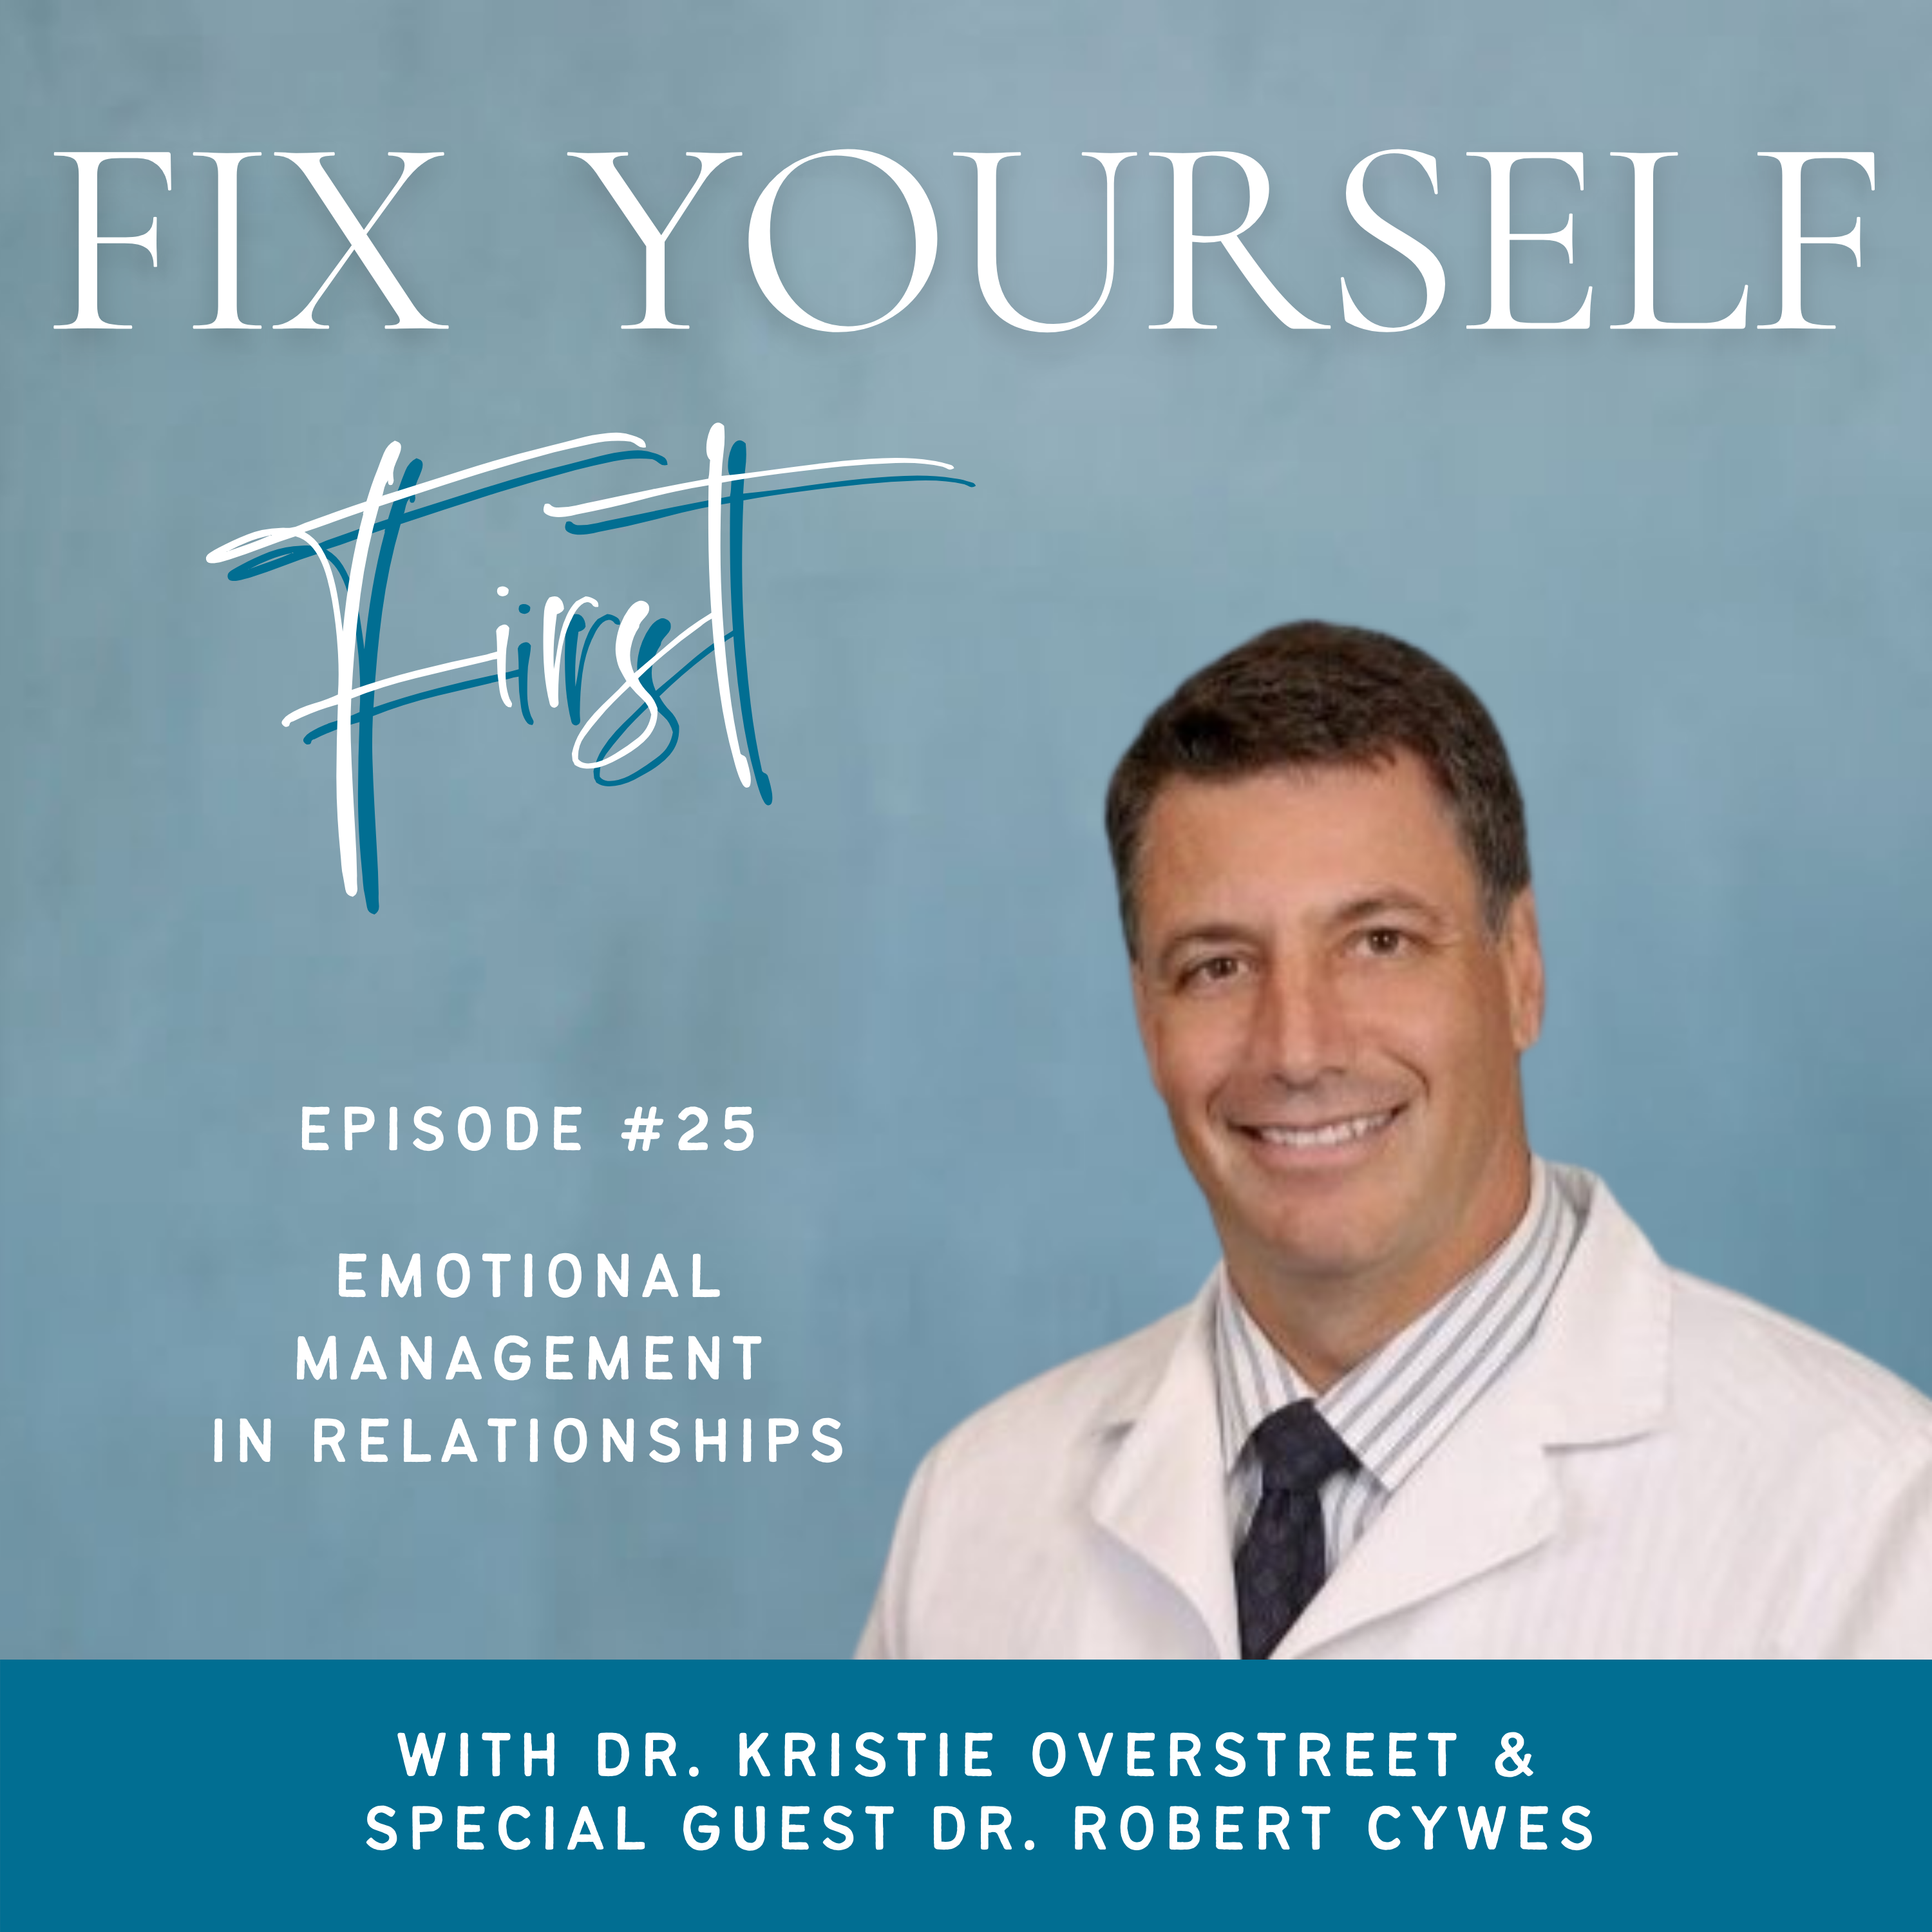 Fix Yourself First - Episode 25